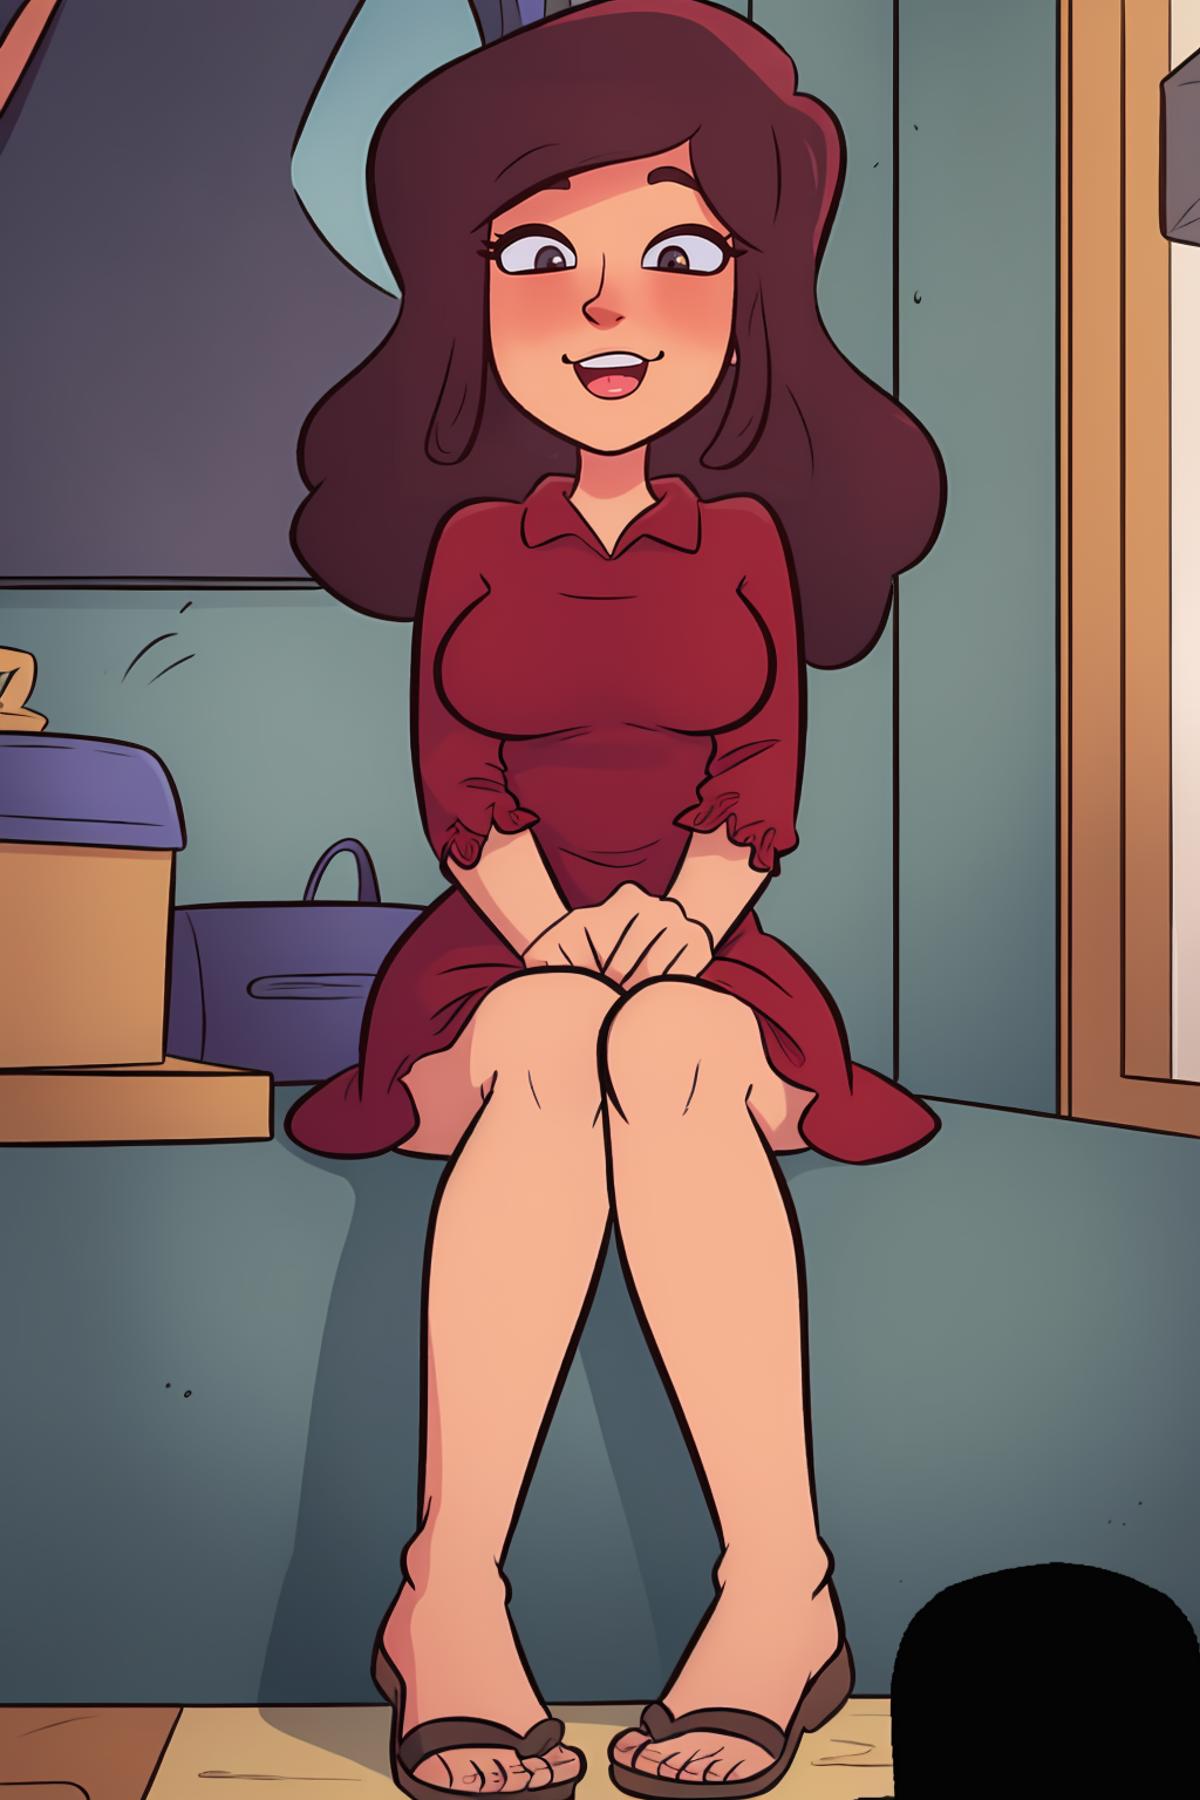 A cartoon woman in a red dress sitting on a desk.